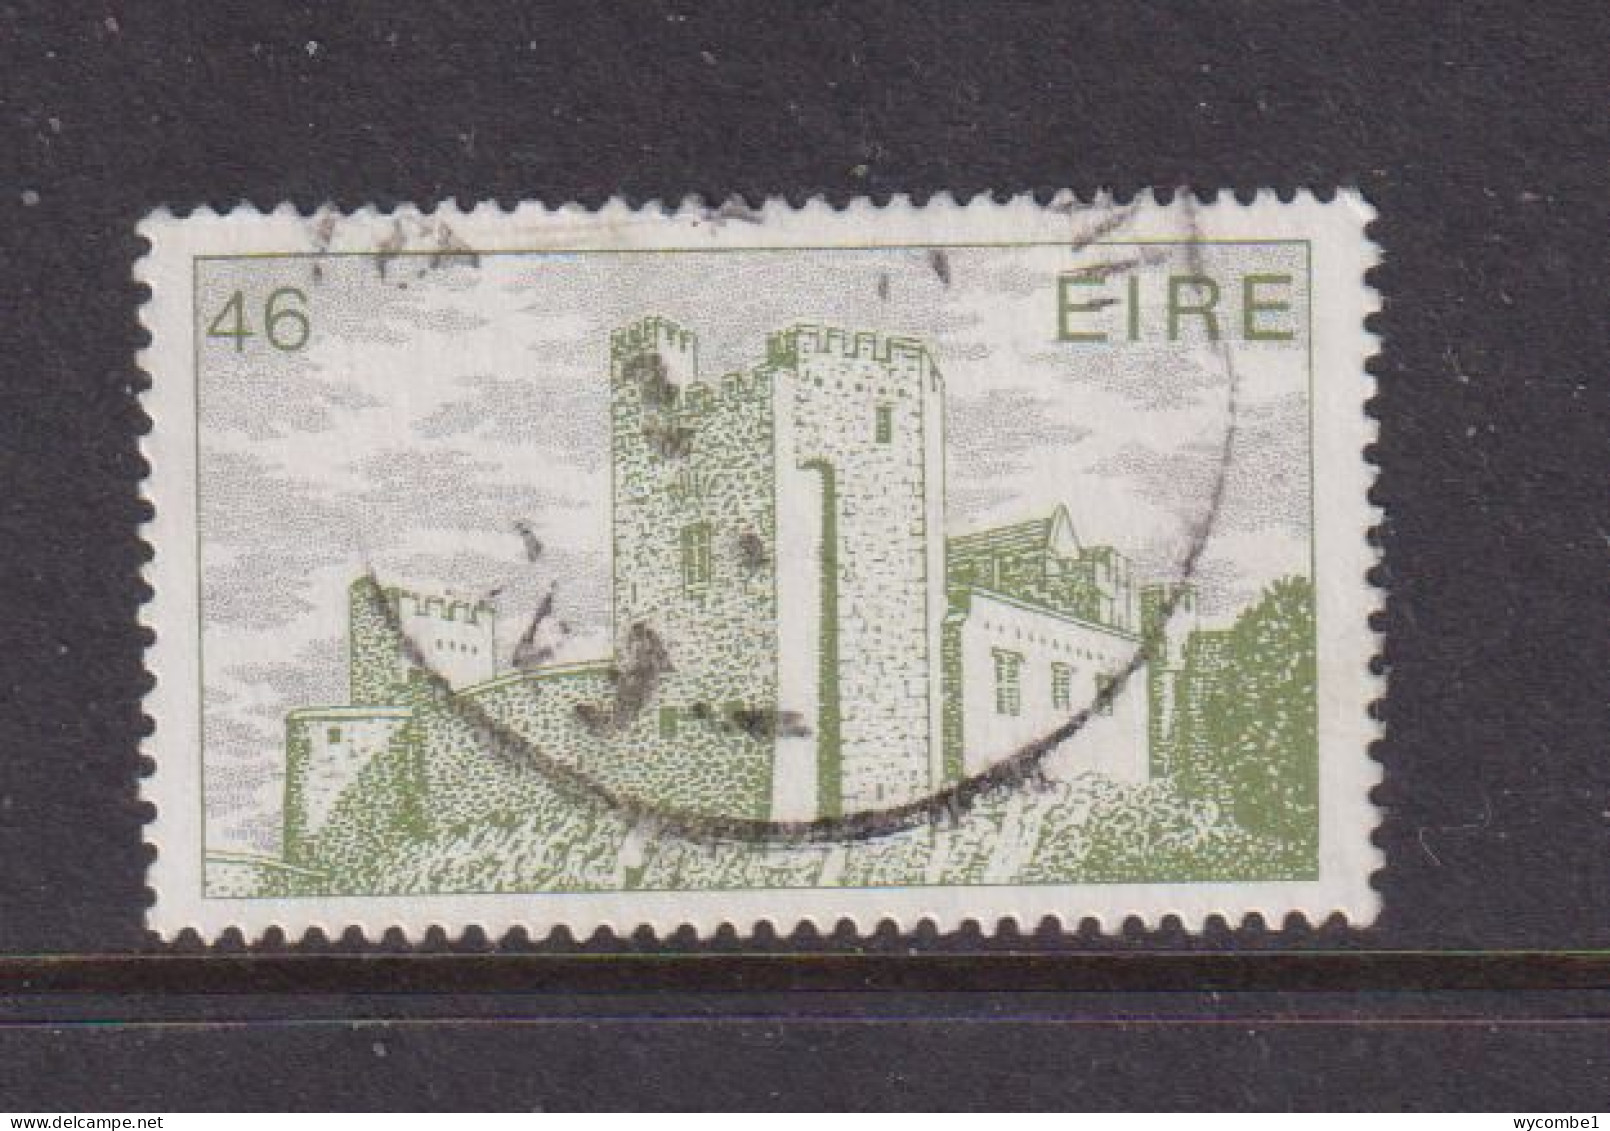 IRELAND - 1963  Architecture Definitive  46p Used As Scan - Usados